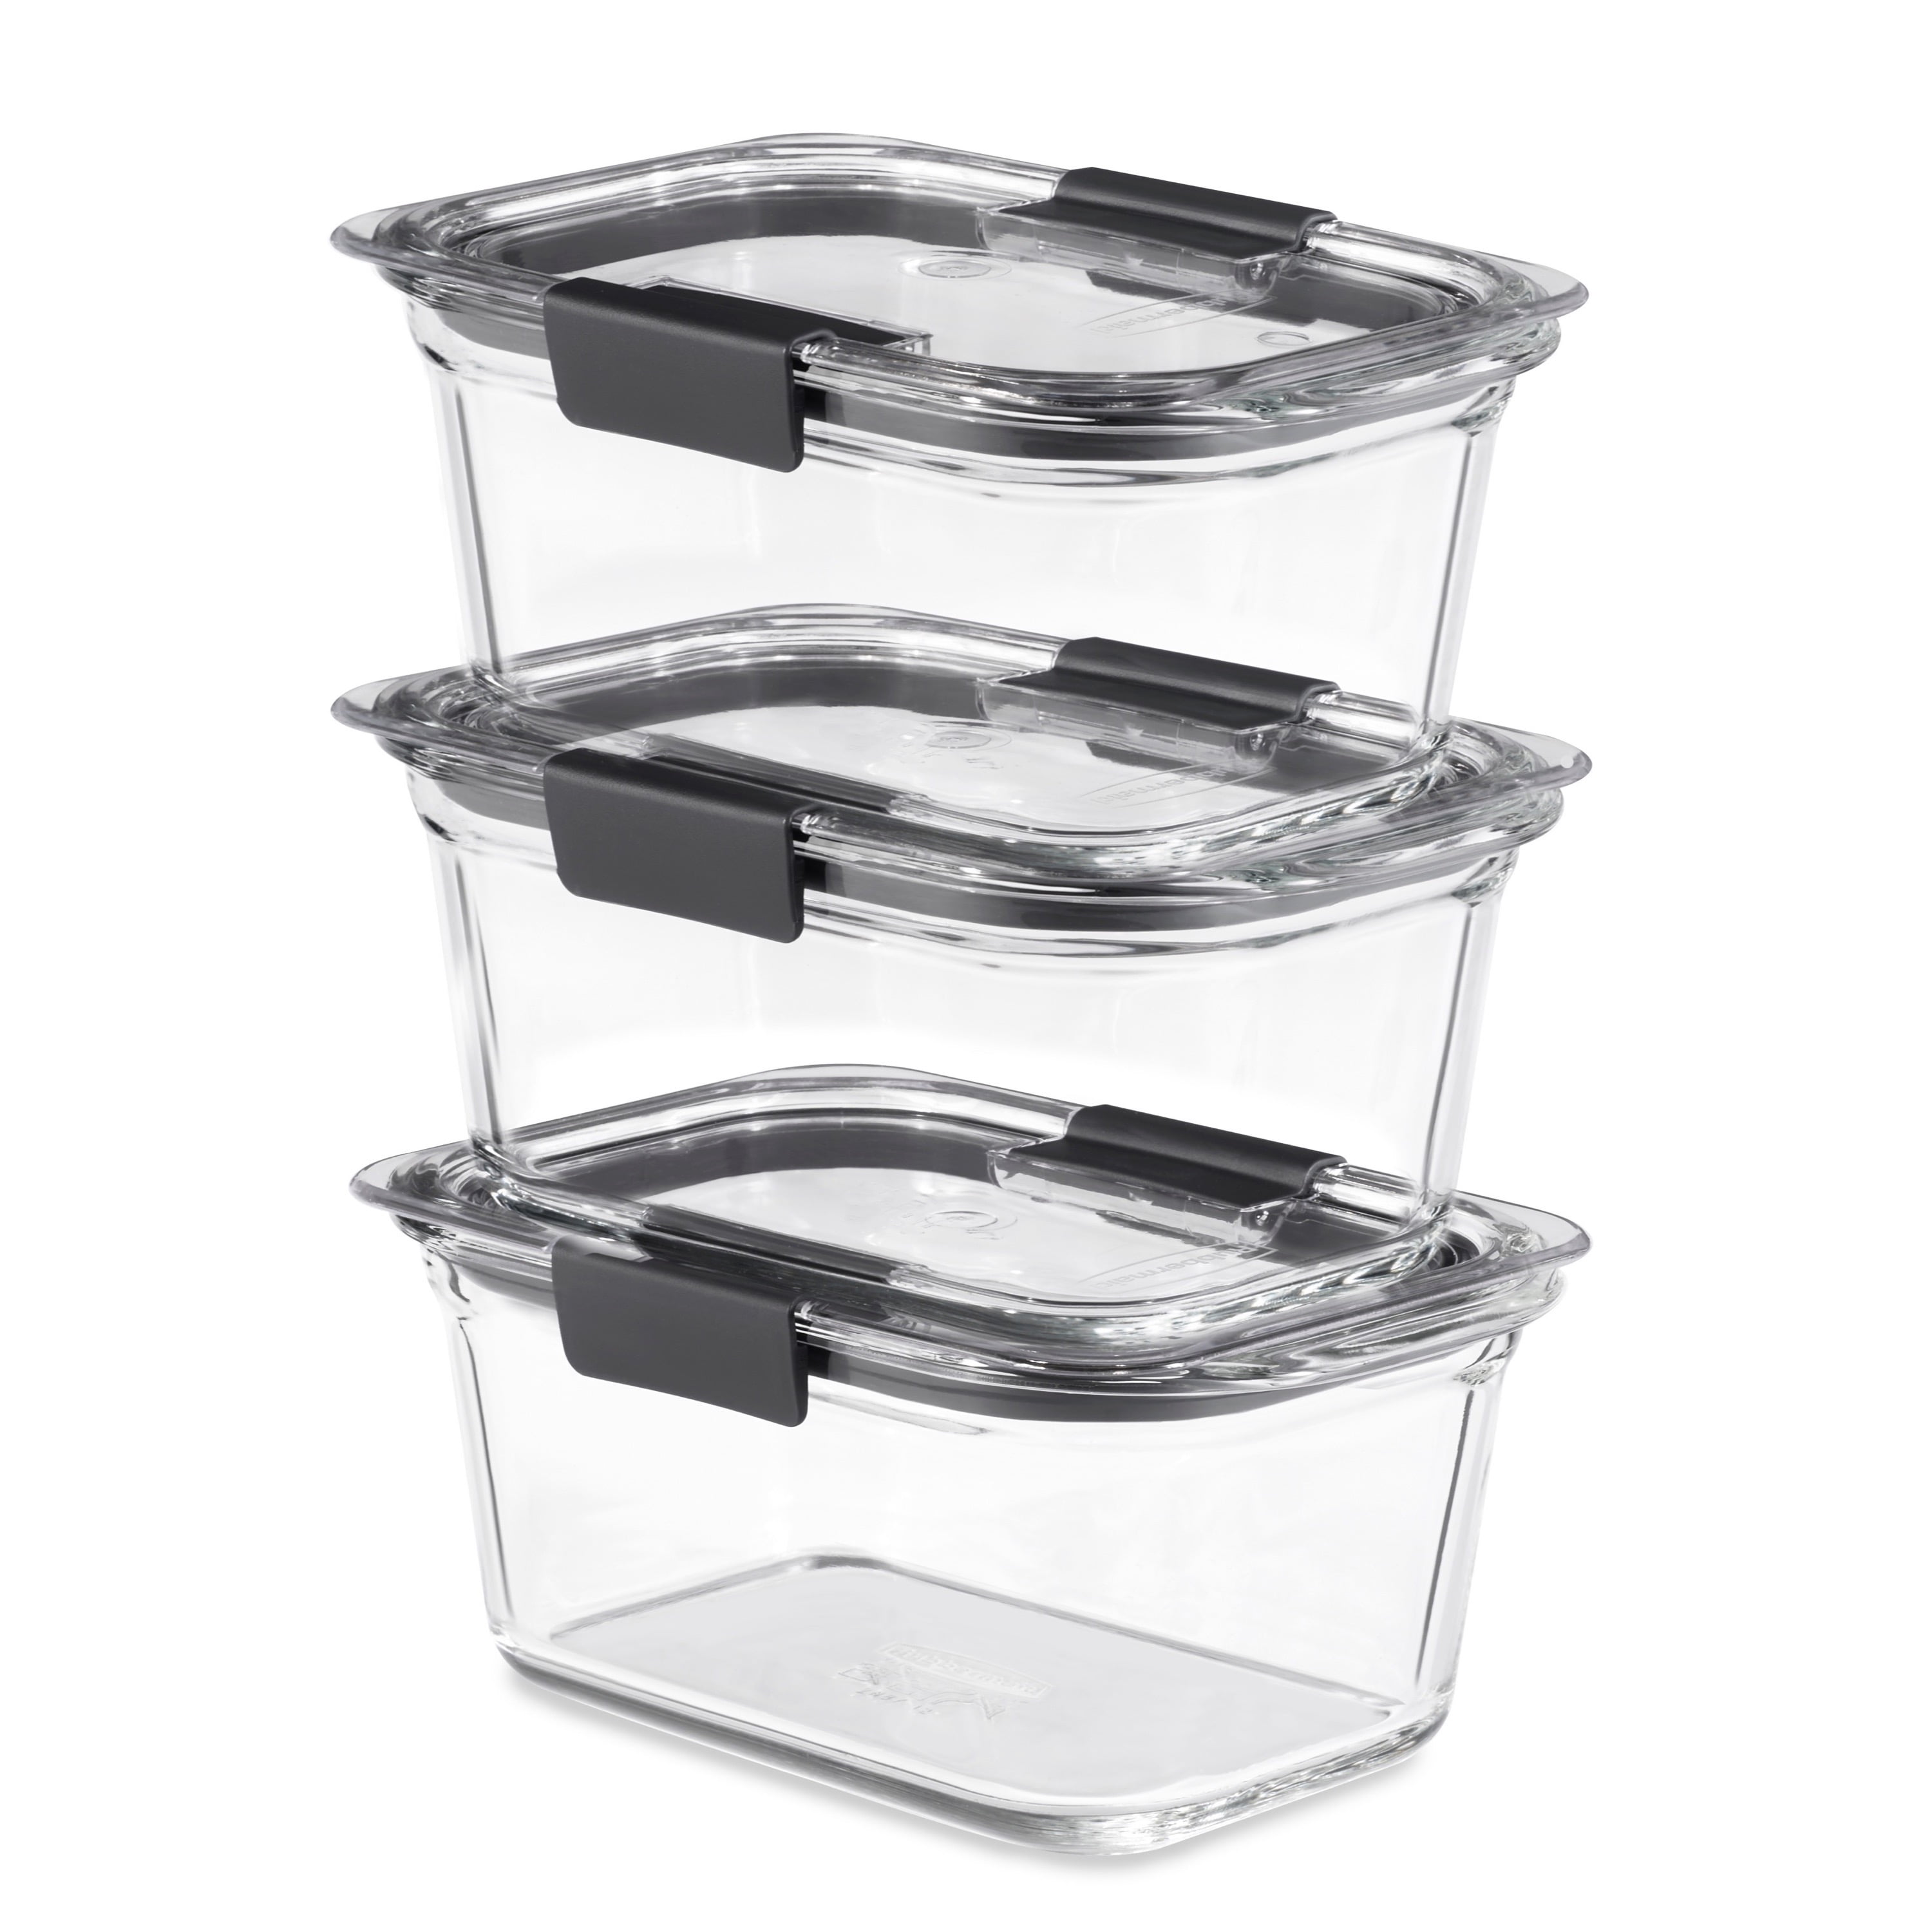 Rubbermaid Brilliance 3 Pack Glass Food Storage Containers 4 7 Cup Leak Proof Bpa Free